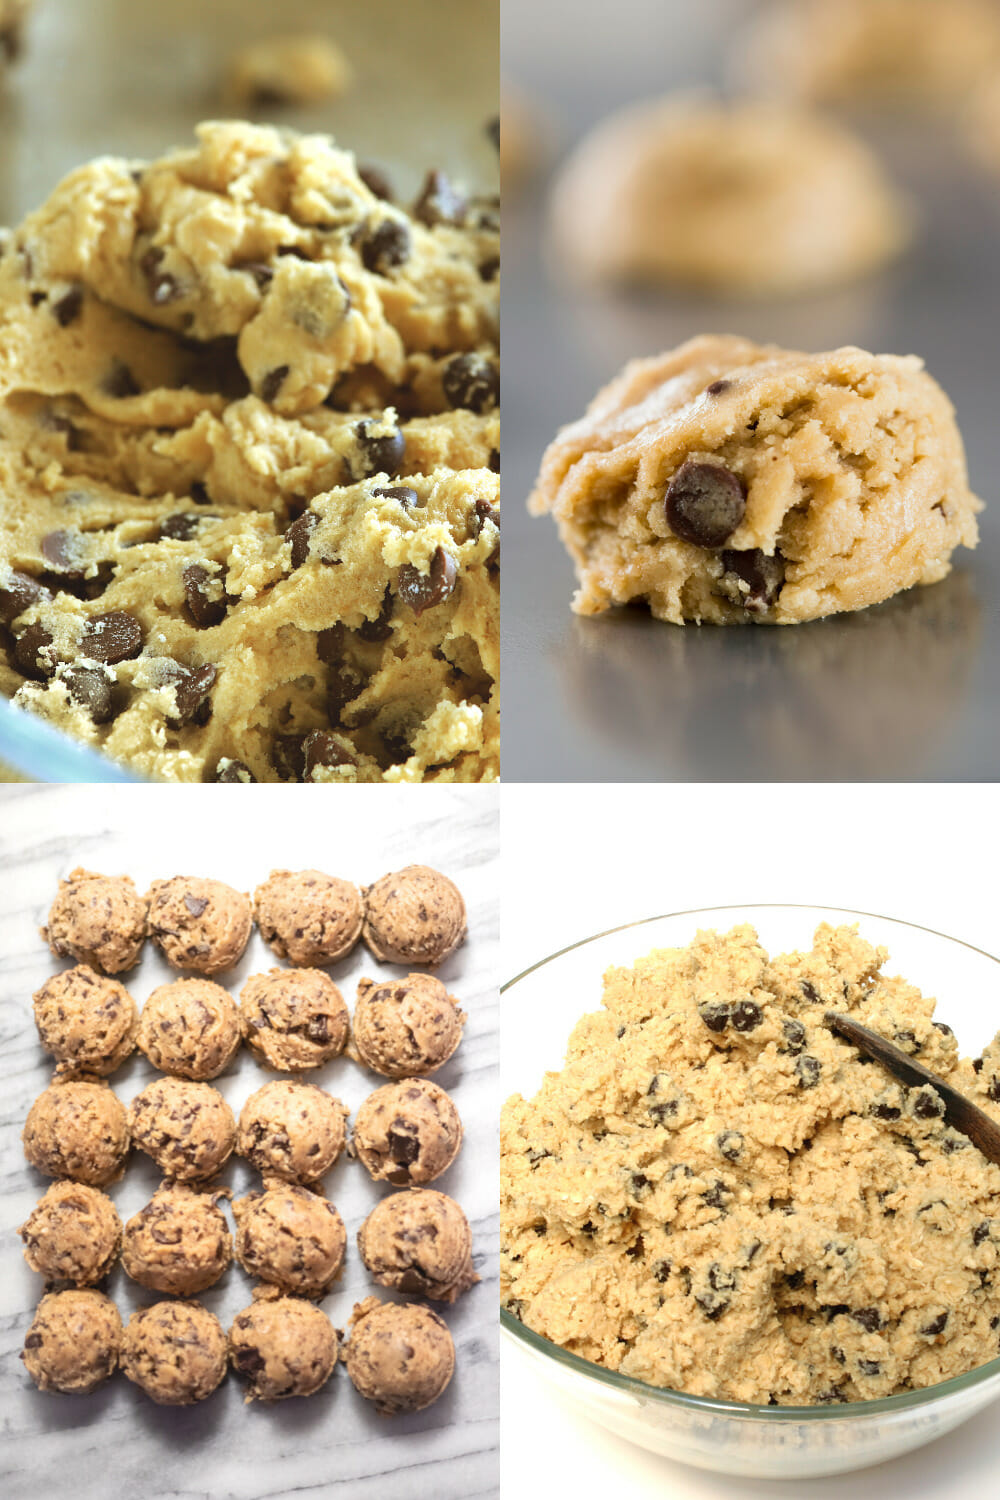 How To Make Cookie Dough Less Sticky Without Flour